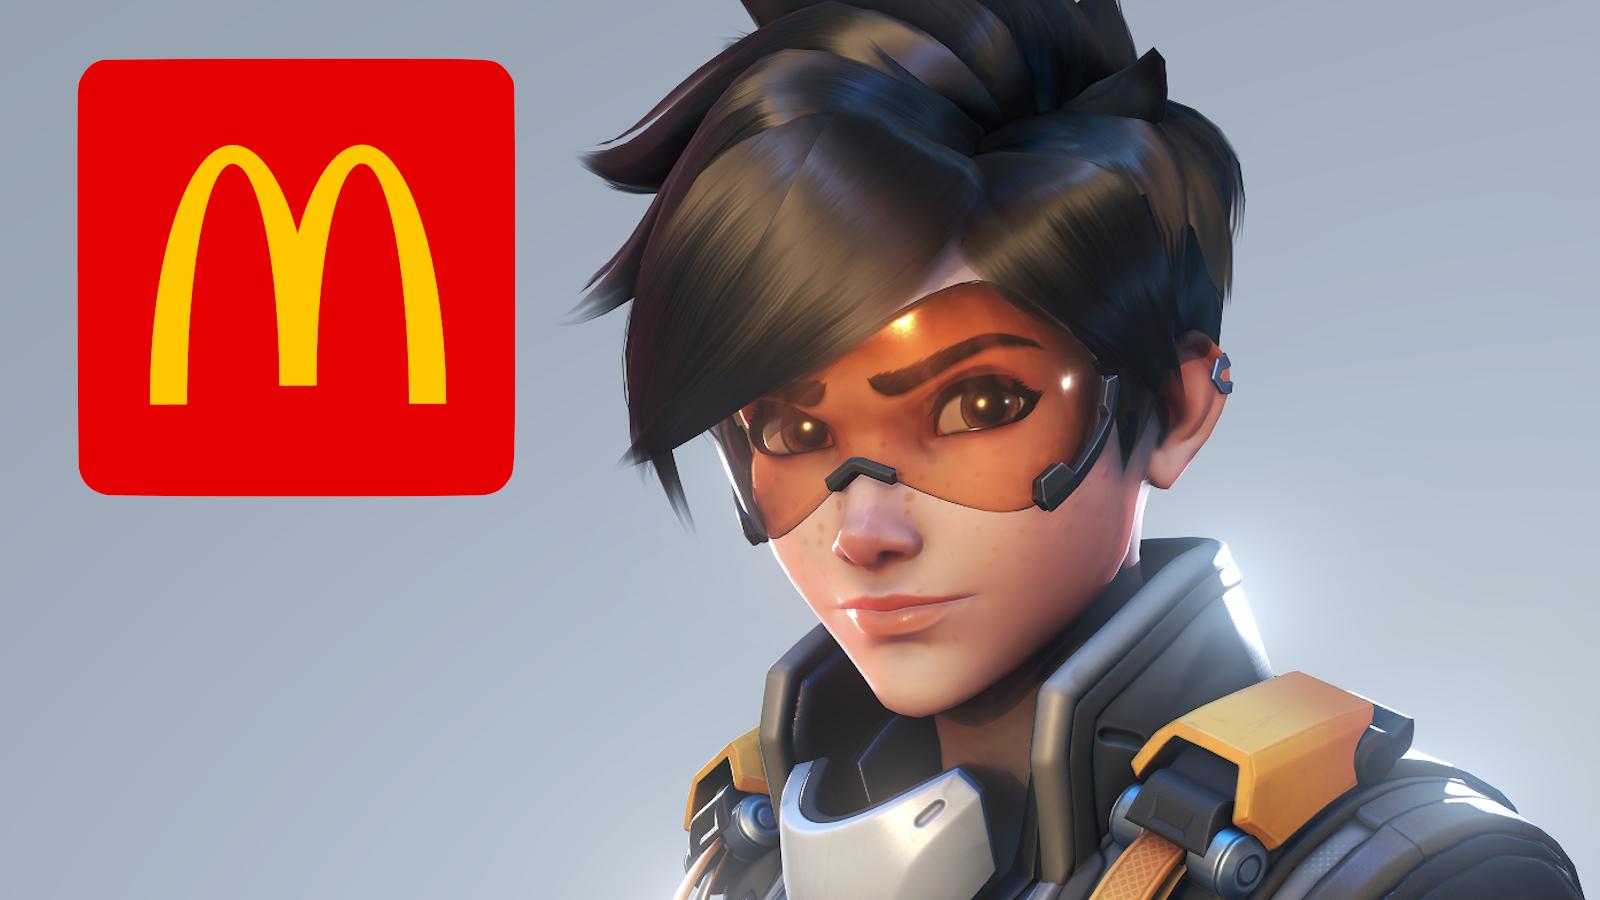 Overwatch 2 collabs with Microsoft for limited time currency exchange -  Dexerto